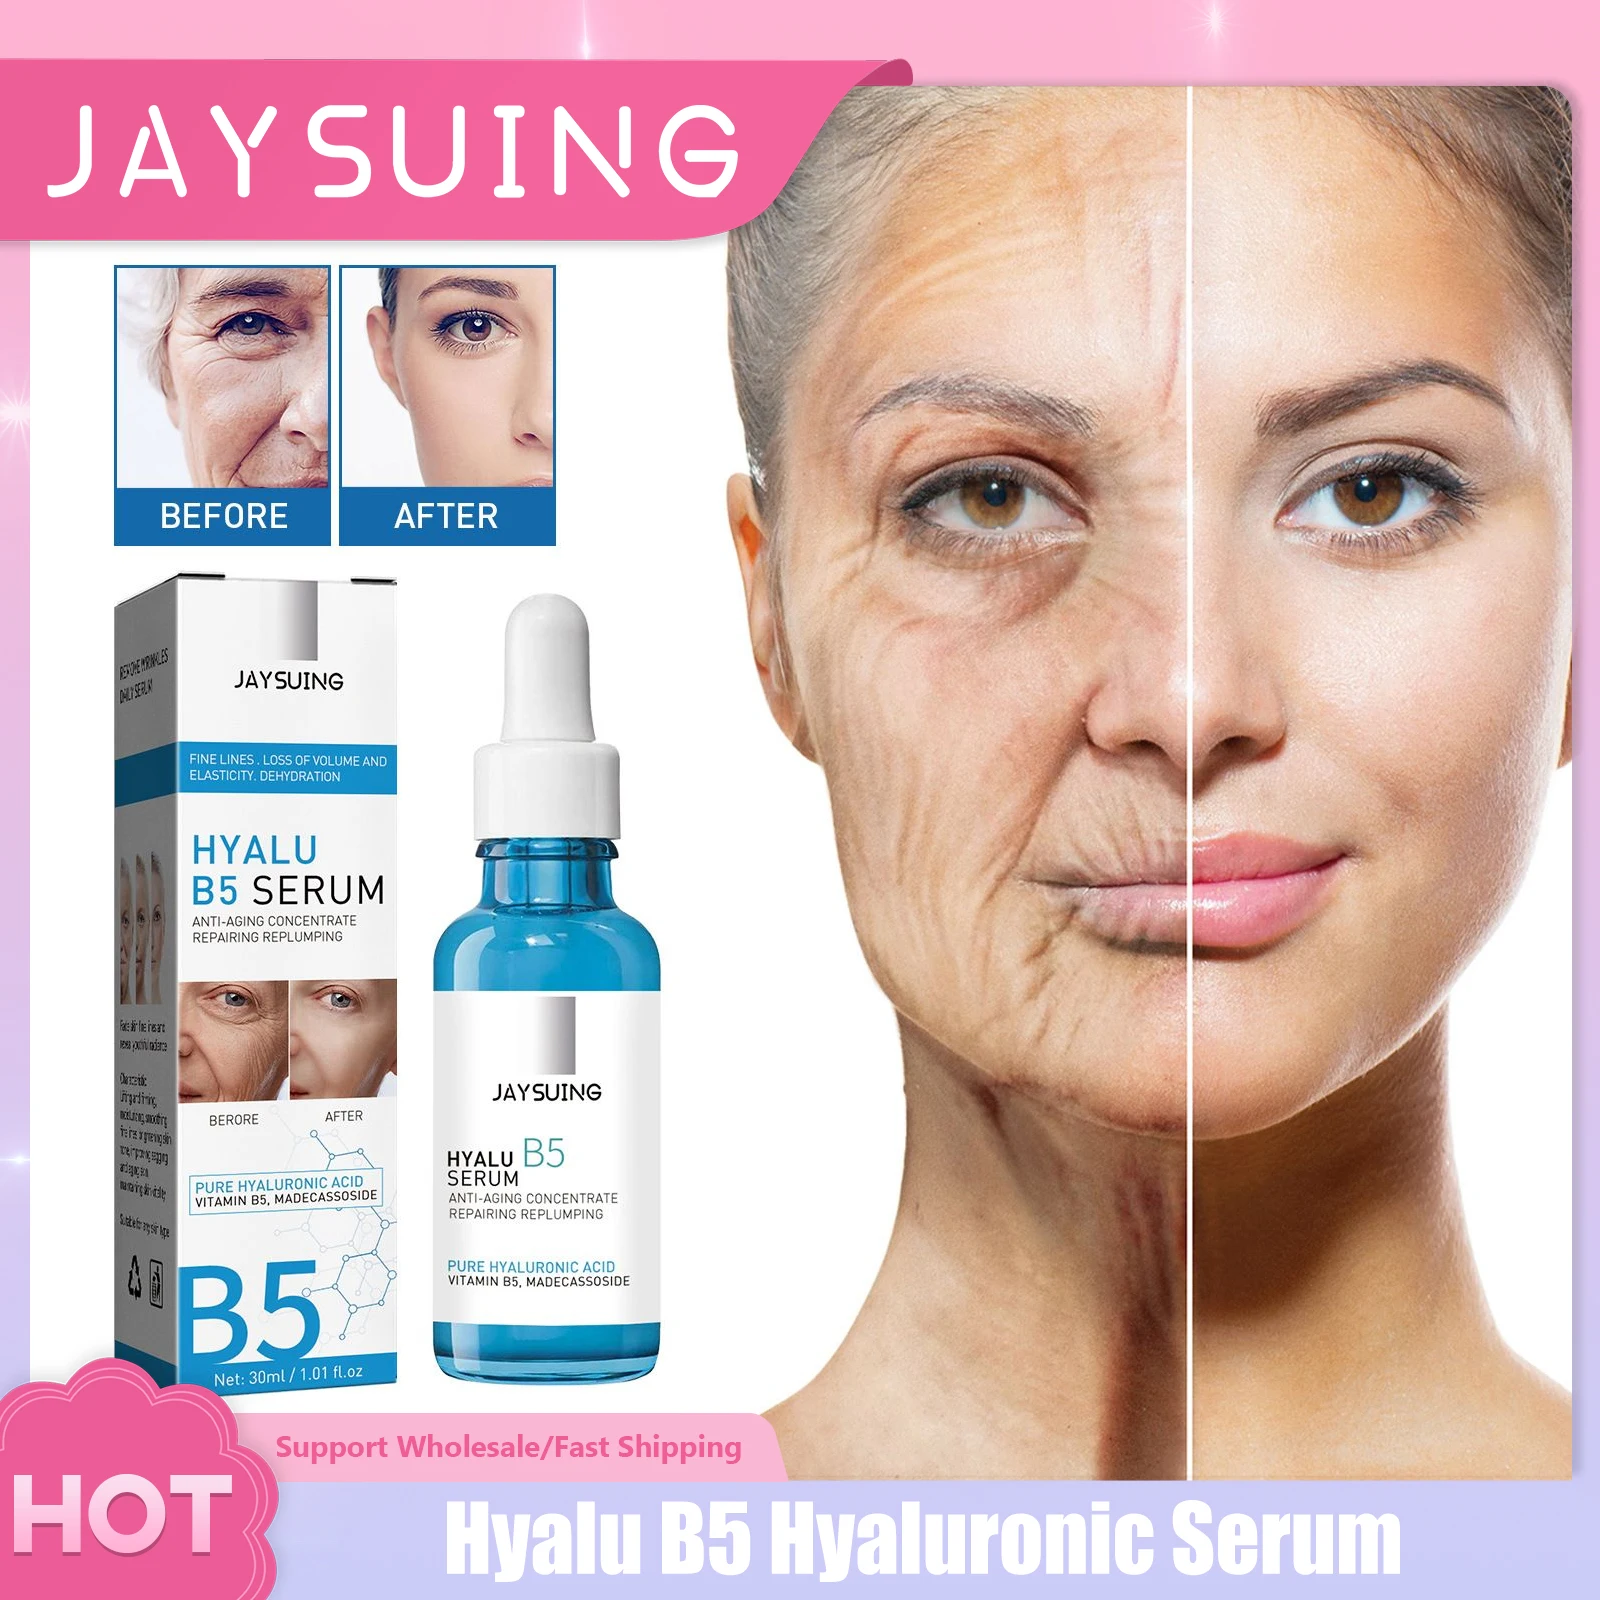 

Anti Wrinkle Serum Hyaluronic Acid B5 Anti Aging Firm Brighten Face Skin Shrink Pores Fade Fine Lines Whiten Facial Care Essence